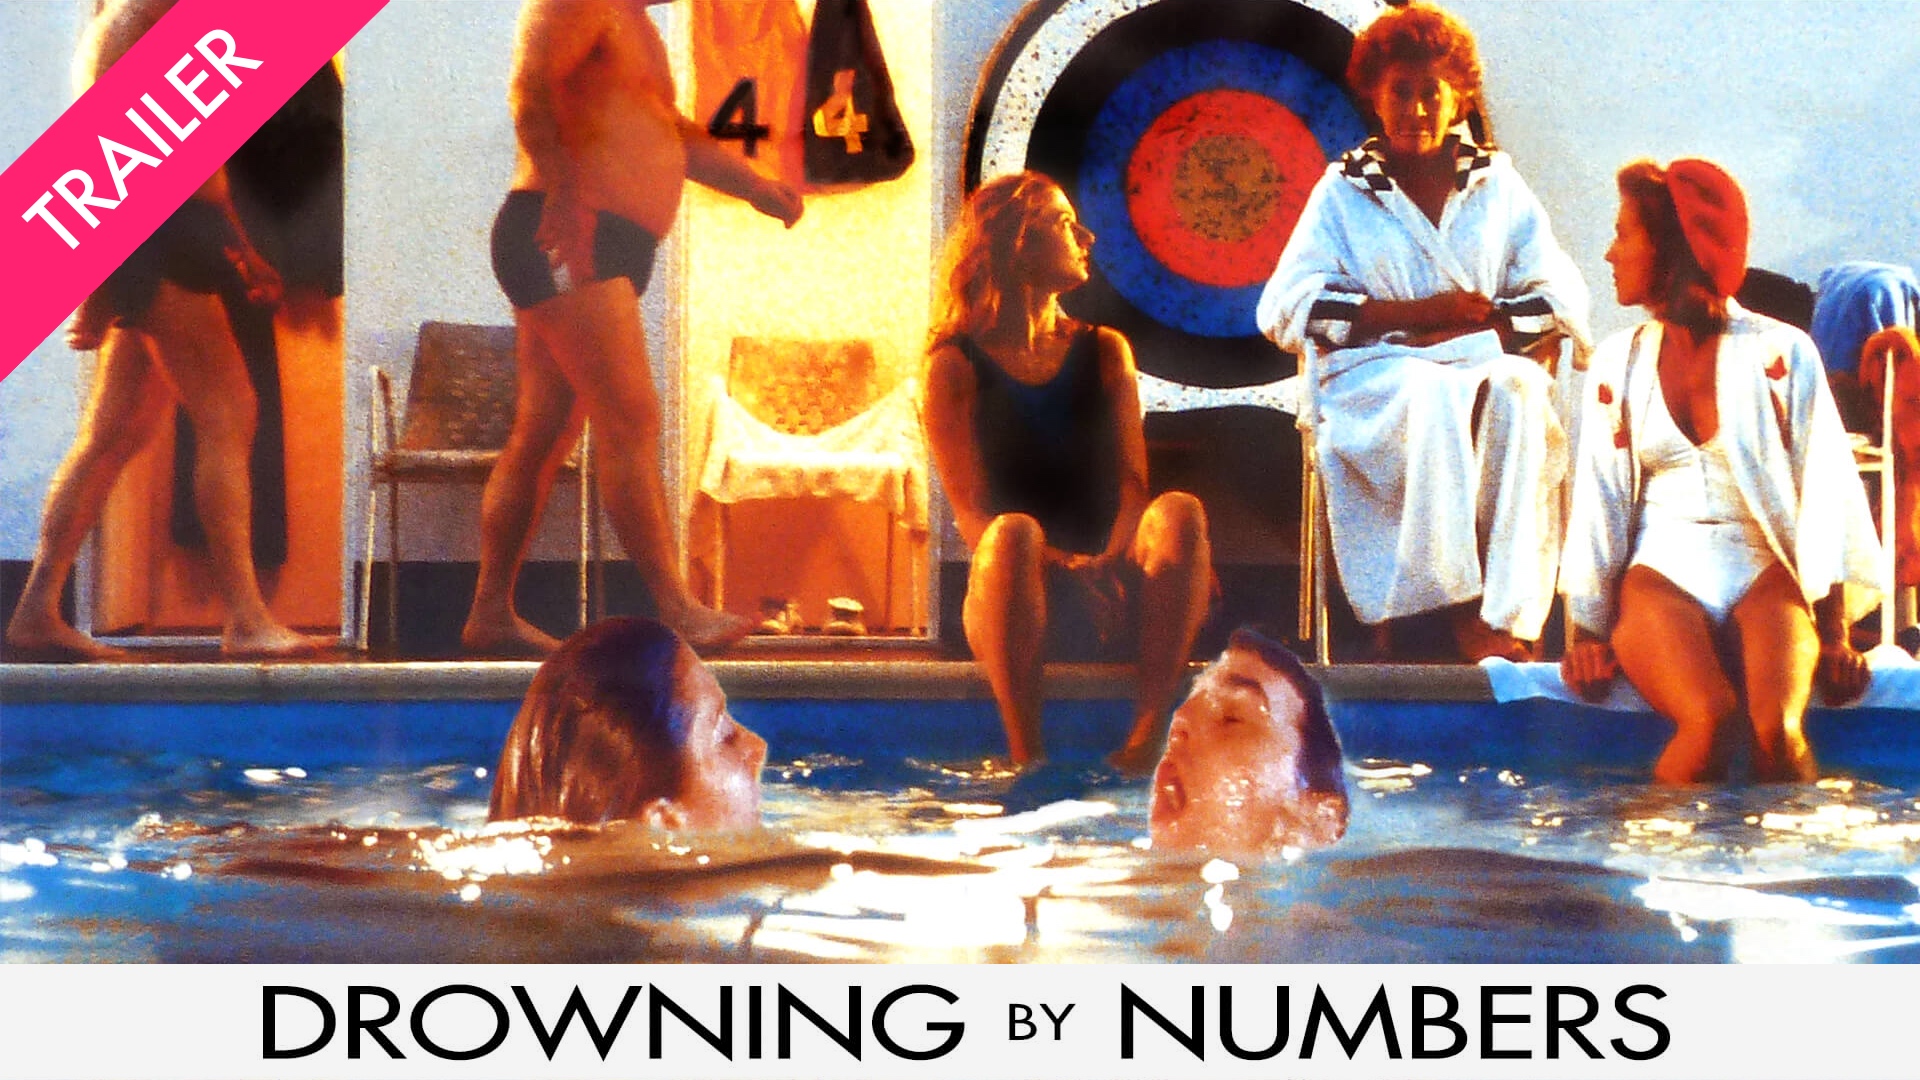 Drowning by Numbers